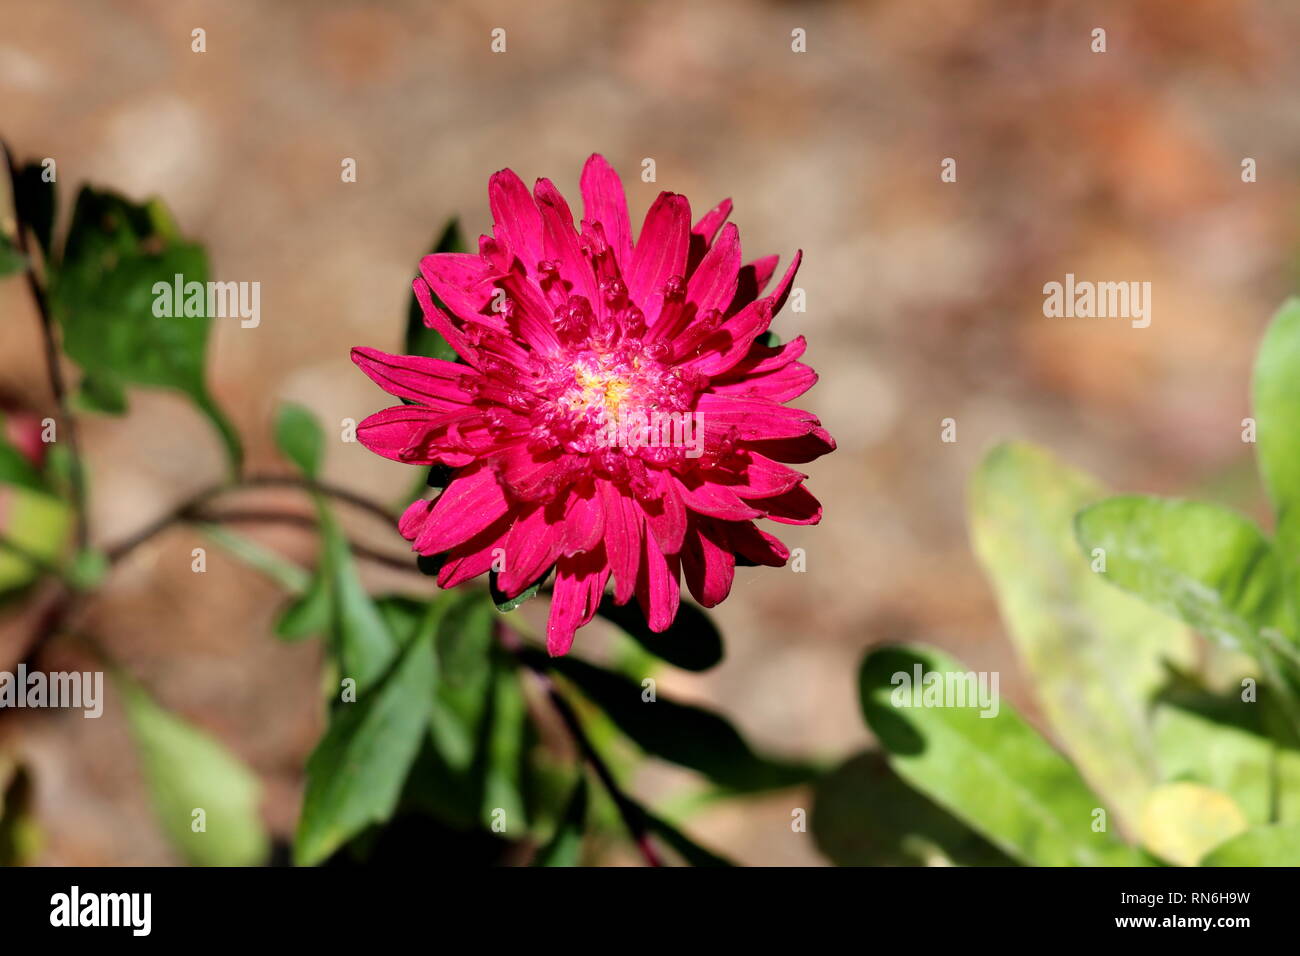 China aster or Callistephus chinensis or Annual aster monotypic genus of flowering plant planted in local garden with dense red flower Stock Photo